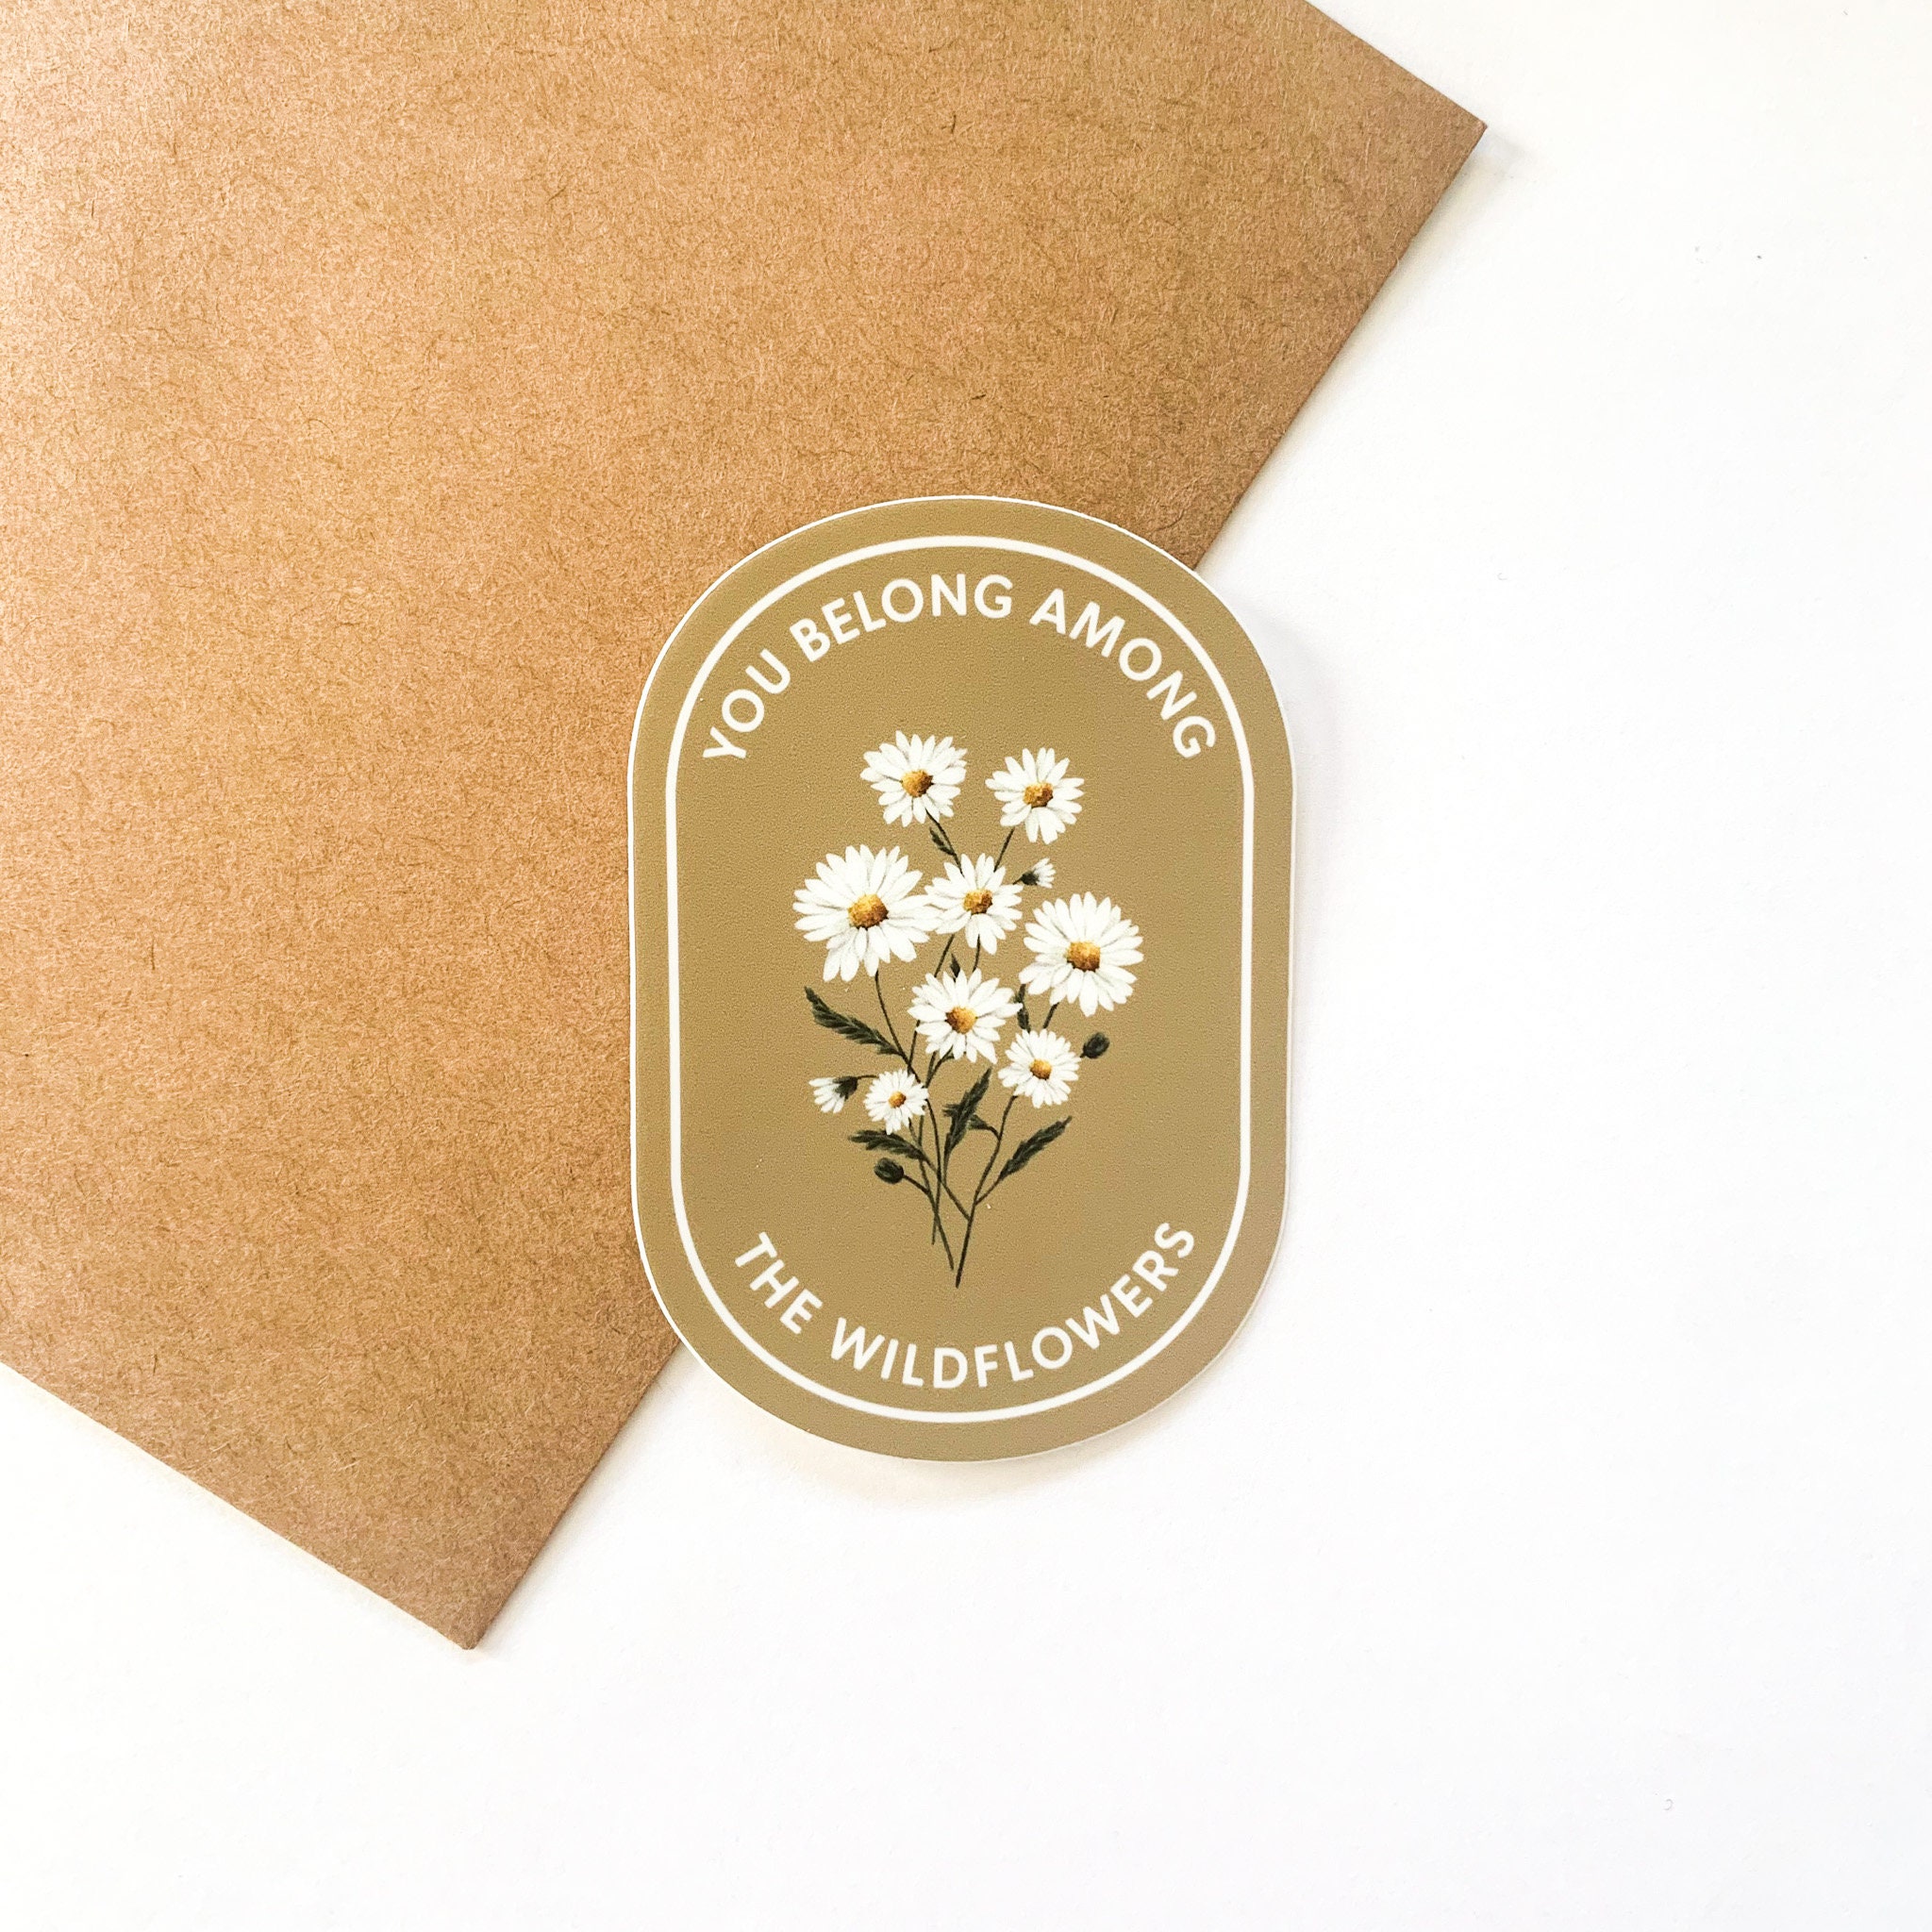 You Belong Among the Wildflowers Sticker, Cute Flower Stickers for  Hydroflask Water Bottle, Lyrics Decal for Plant Moms or Nature Lovers